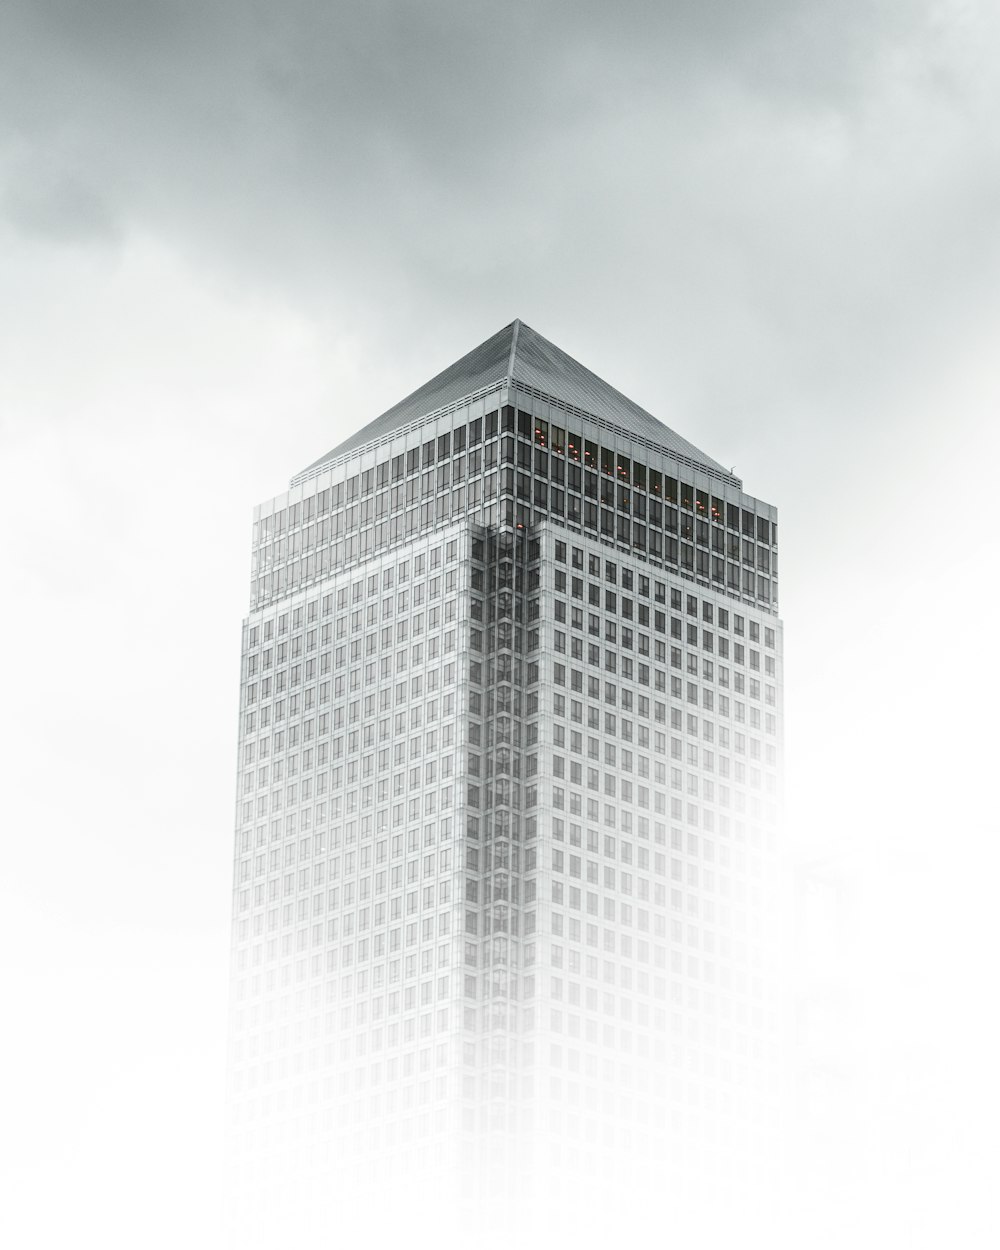 worm's-eye view photography of white and gray concrete building under cloudy sky